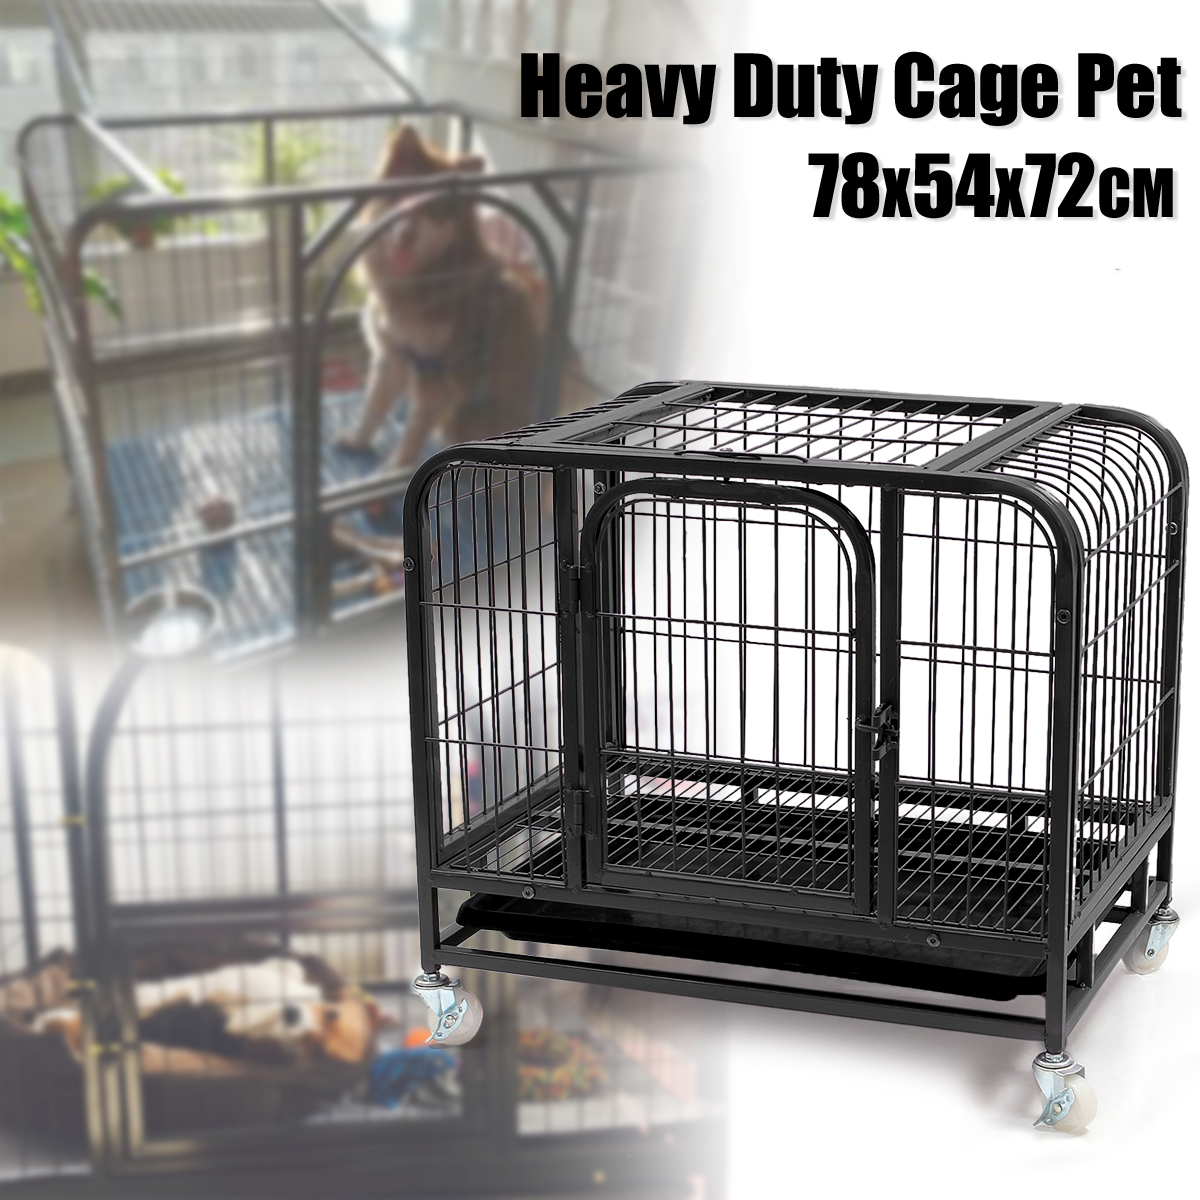 31-Dog-Crate-Cage-2-Doors-Cat-Pet-Poodle-Heavy-Duty-Cage-Puppy-Kennel-House--Tray-with-Four-Wheels-1961041-1